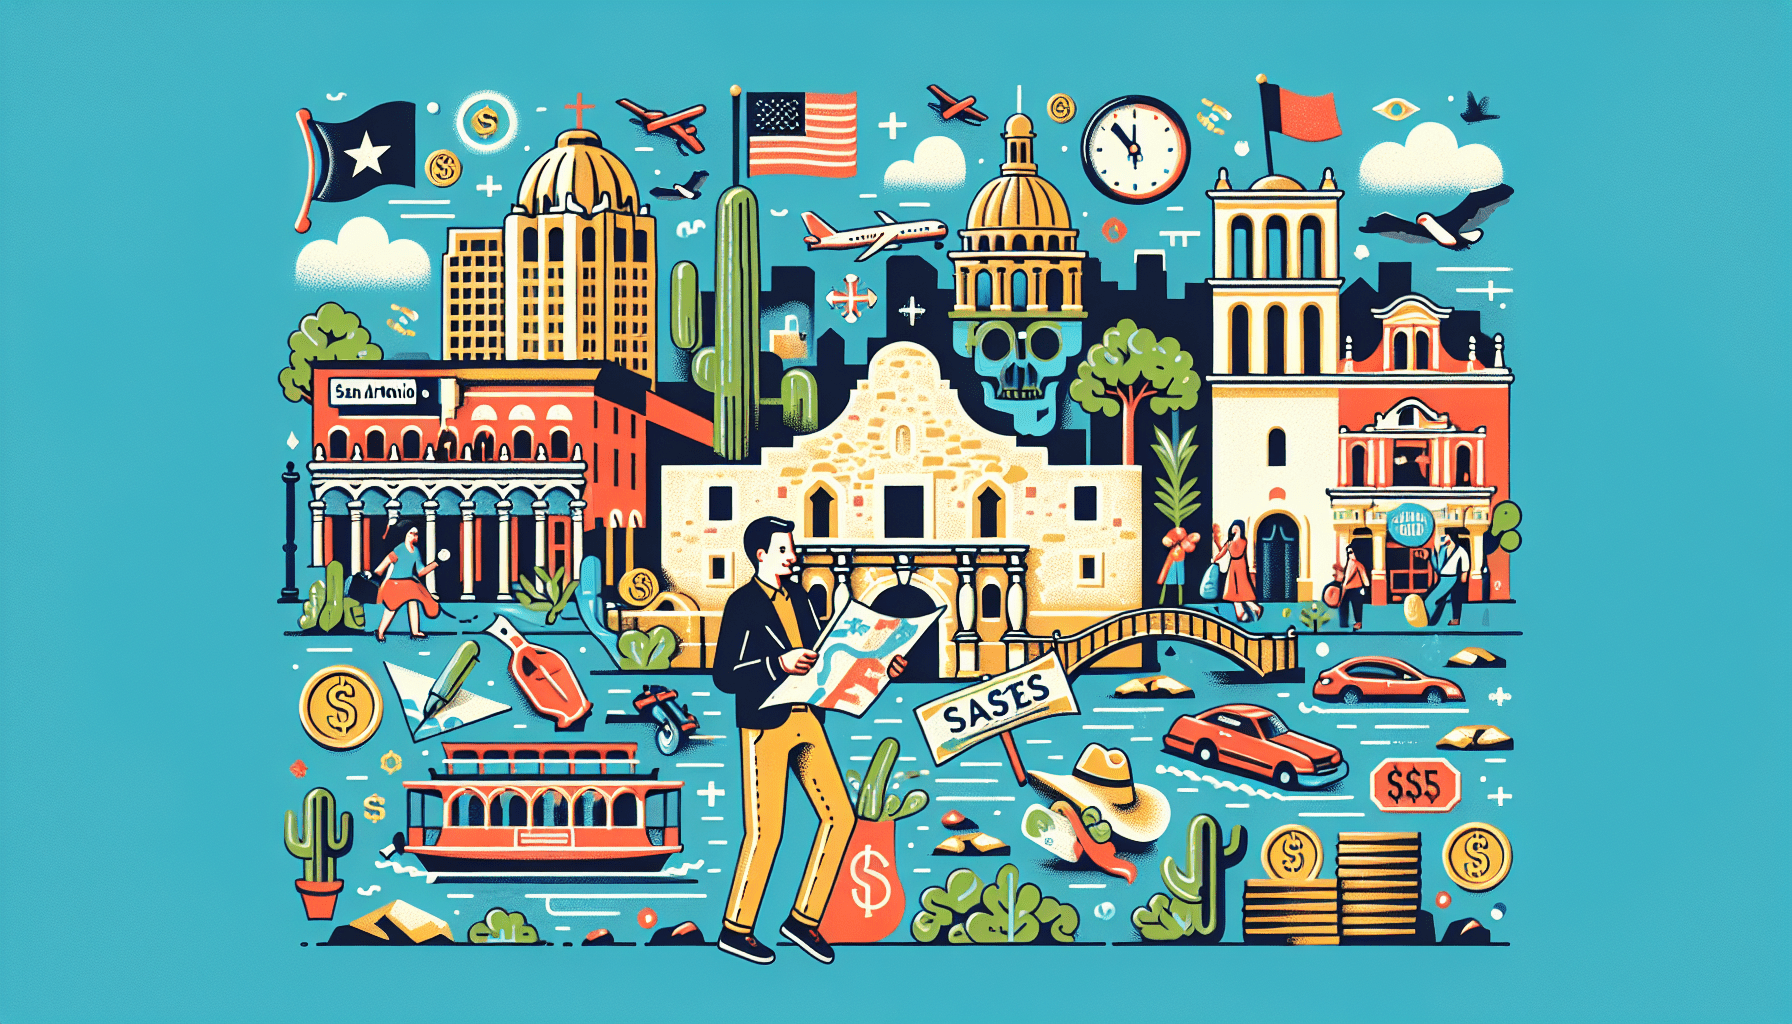 What Is The Budget For Visit San Antonio?